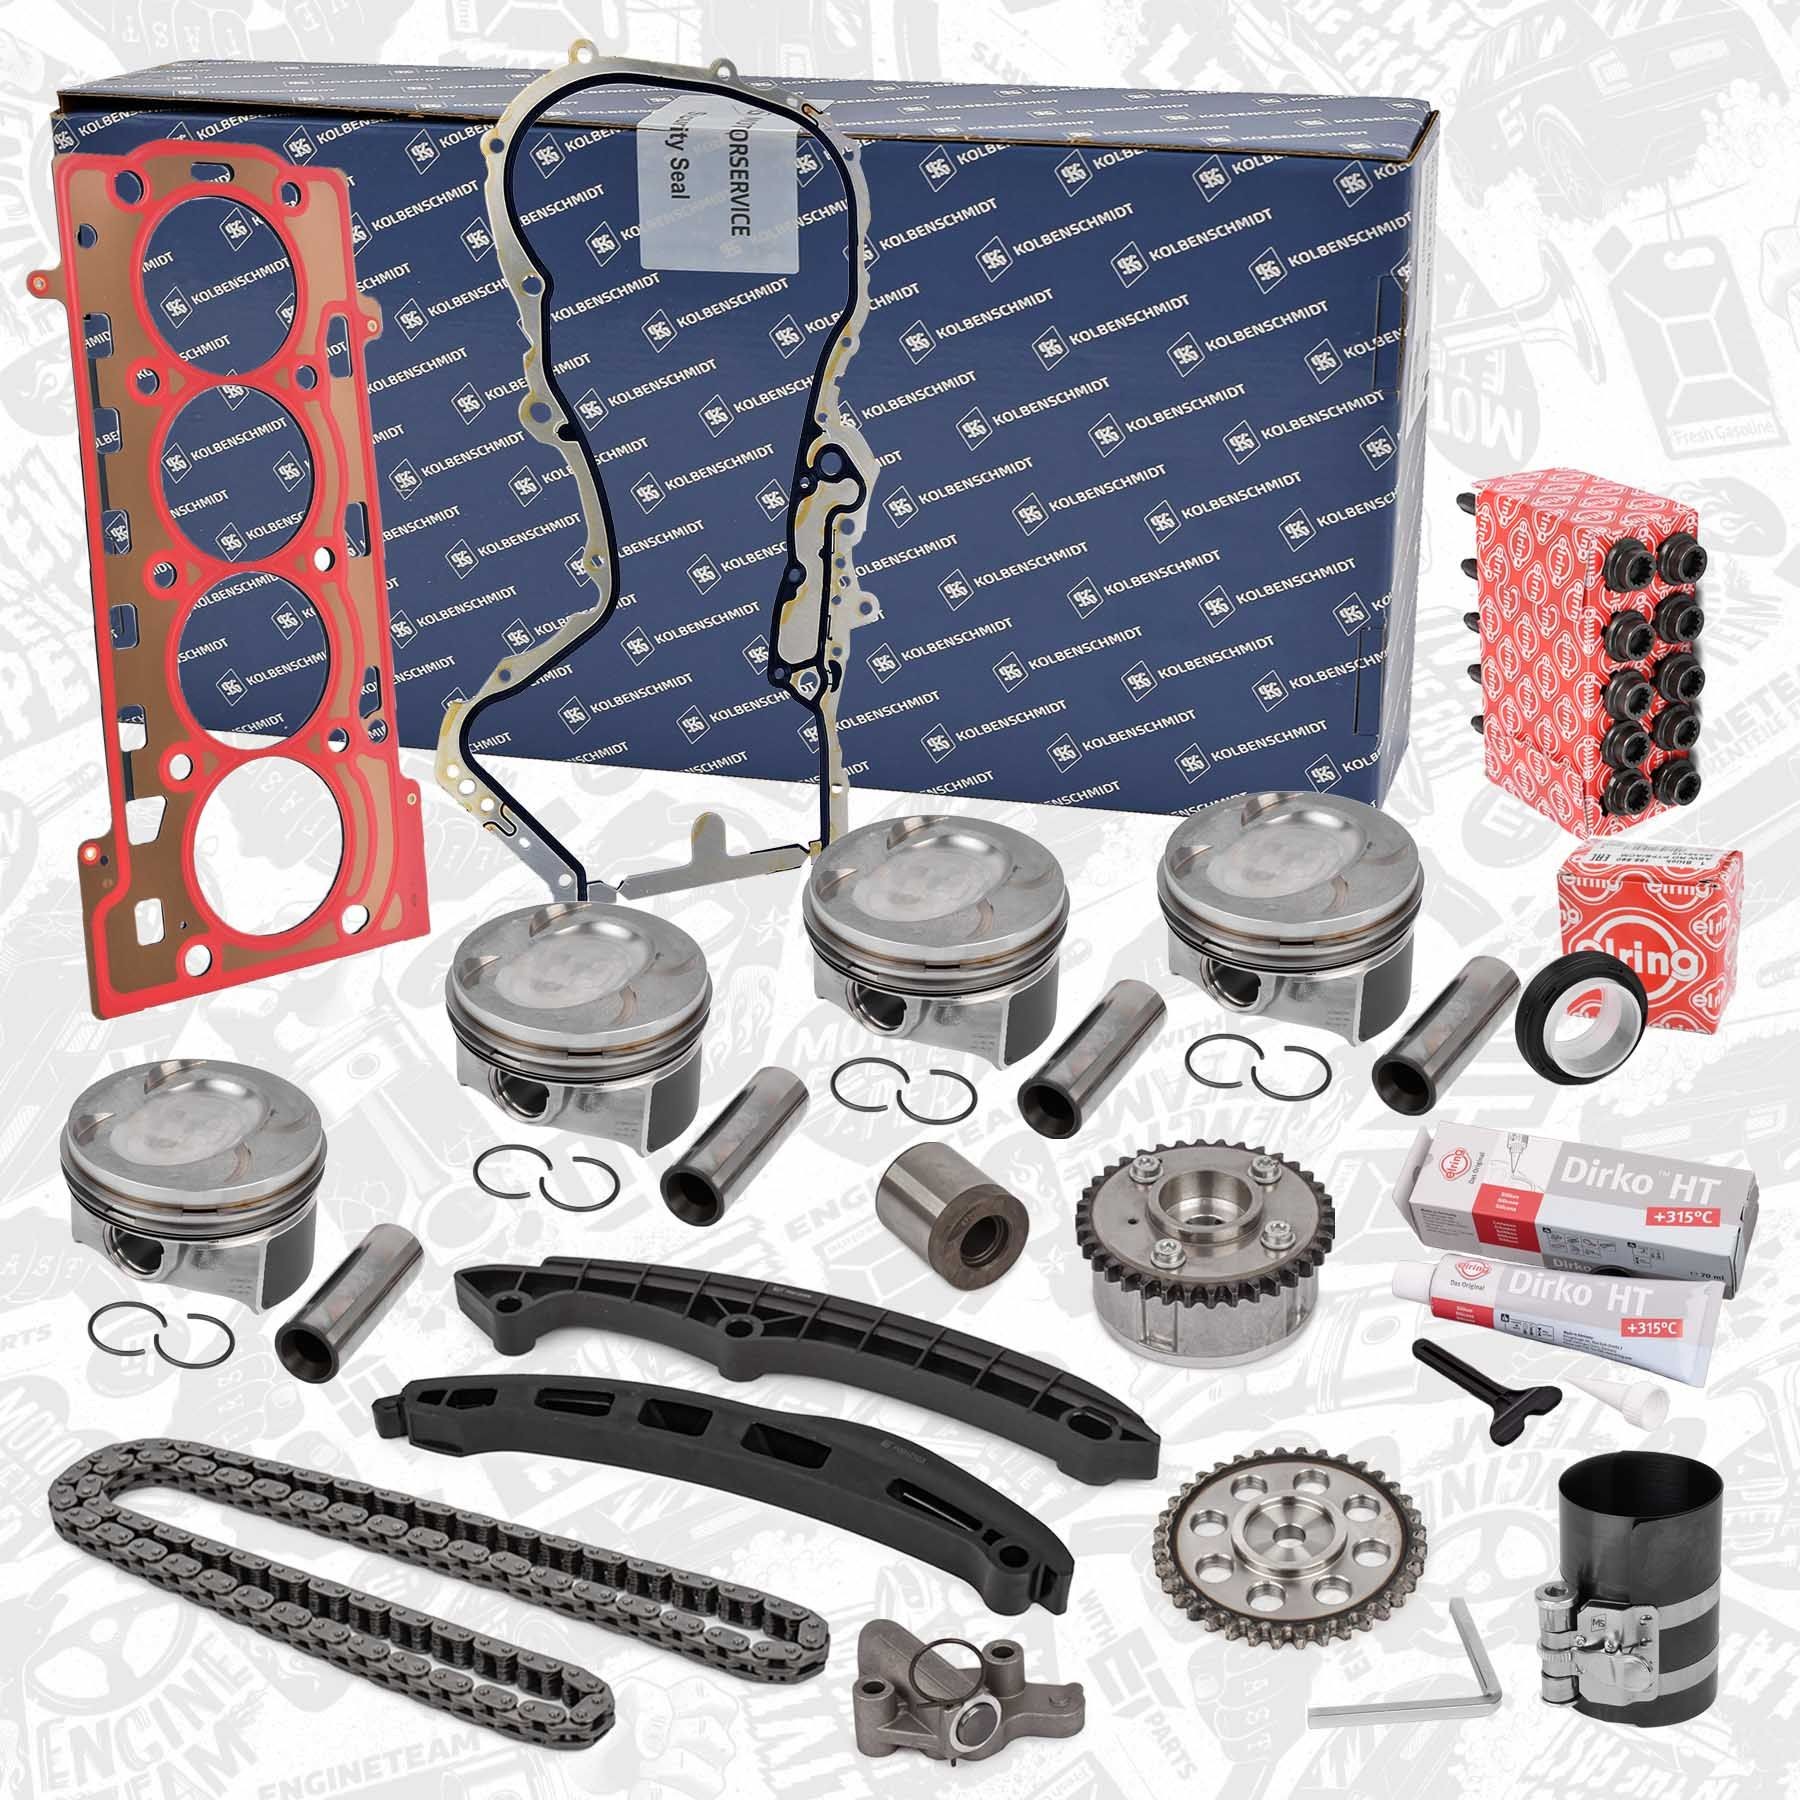 ET ENGINETEAM 76,5 mm, with piston rings, with cylinder head gasket, with screw set Engine piston PM009800KS buy